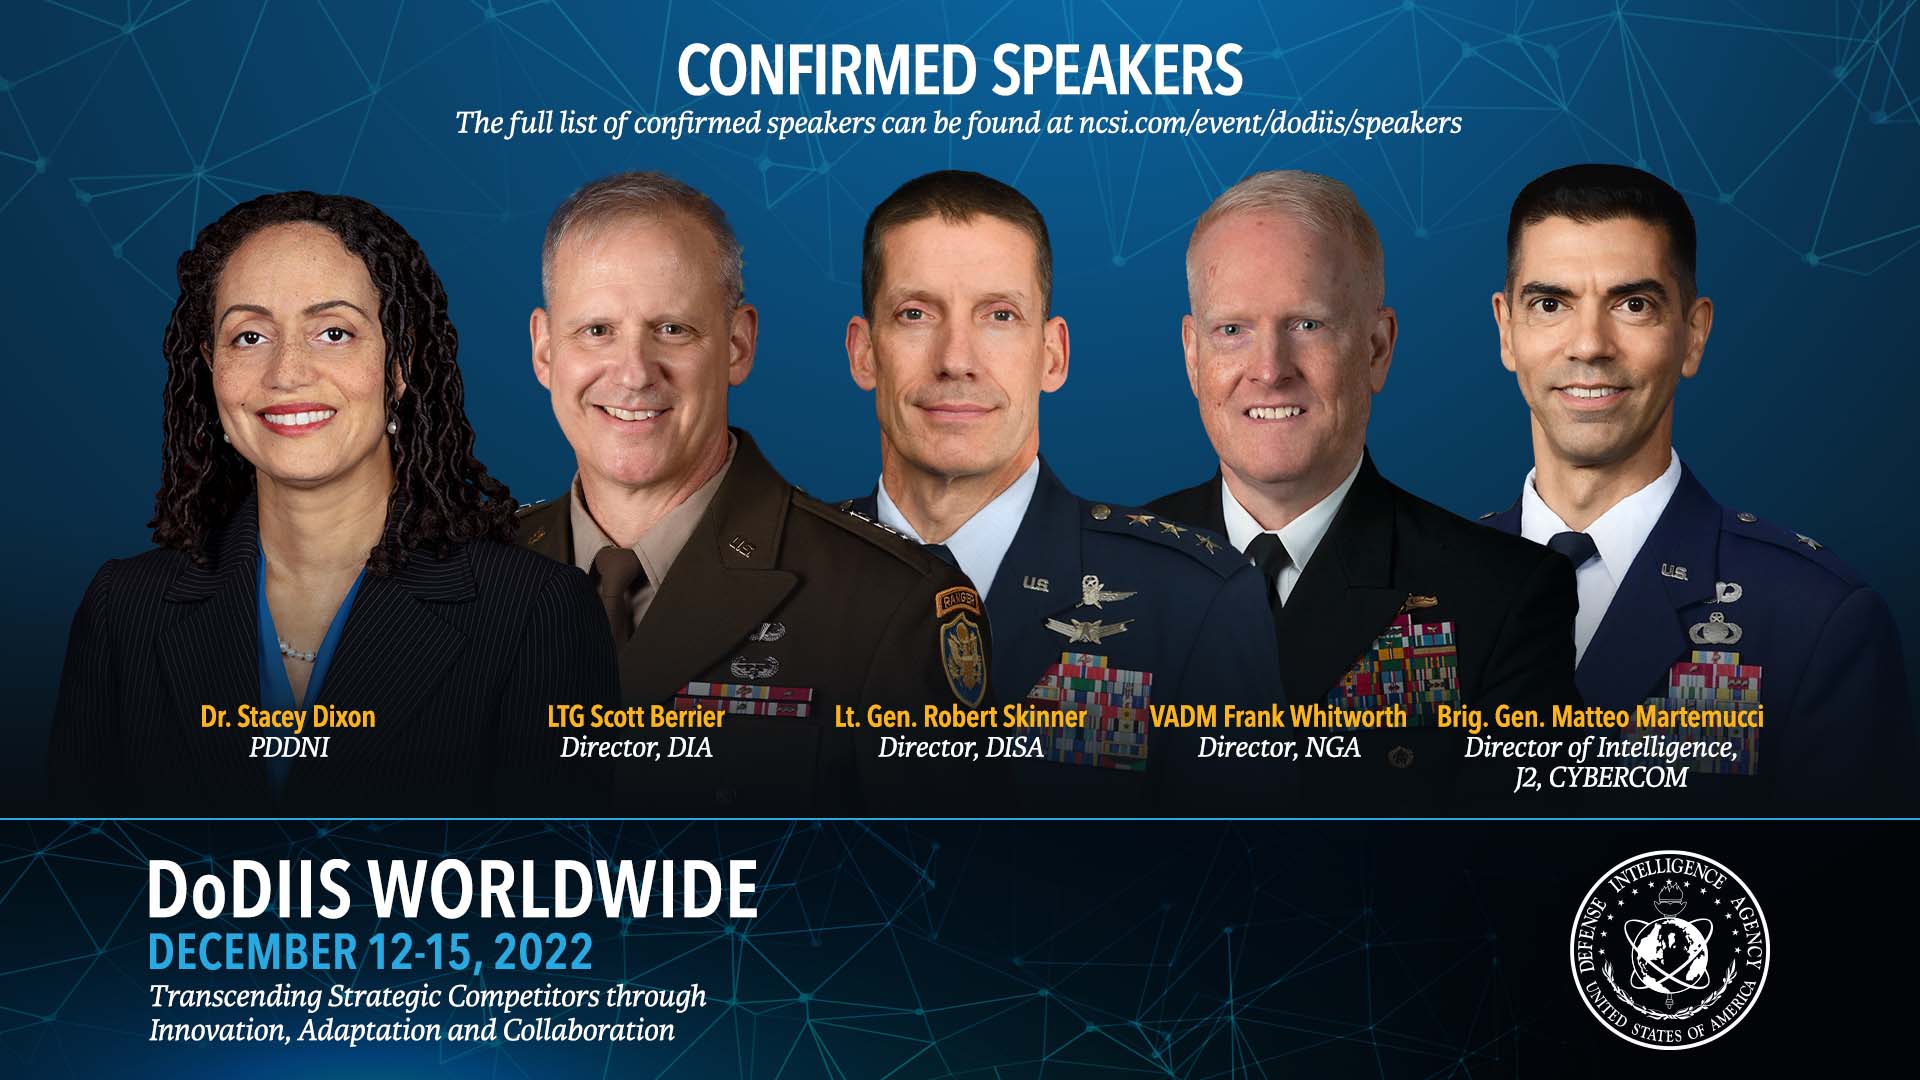 Image of five people in a line from left to right with text in front of each that reads. Dr. Stacey Dixon. LTG Scott Berrier. L.T. Gen. Robert Skinner. V.A.D.M. Frank Whitworth. Brig. Gen. Matteo Martemucci. A title on top that reads. Confirmed Speakers. With a subtext below that reads. The full list of confirmed speakers can be found at. NCSI.com/event/dodiis/speakers. In the bottom of the image, on the left is large, white text that reads. DoDIIS Worldwide. Blue text below that which reads. December 12 to 15, 2022. Followed by a slogan that reads. Transcending Stategic Competitors through Innovation, Adaptation, and Collaboration.